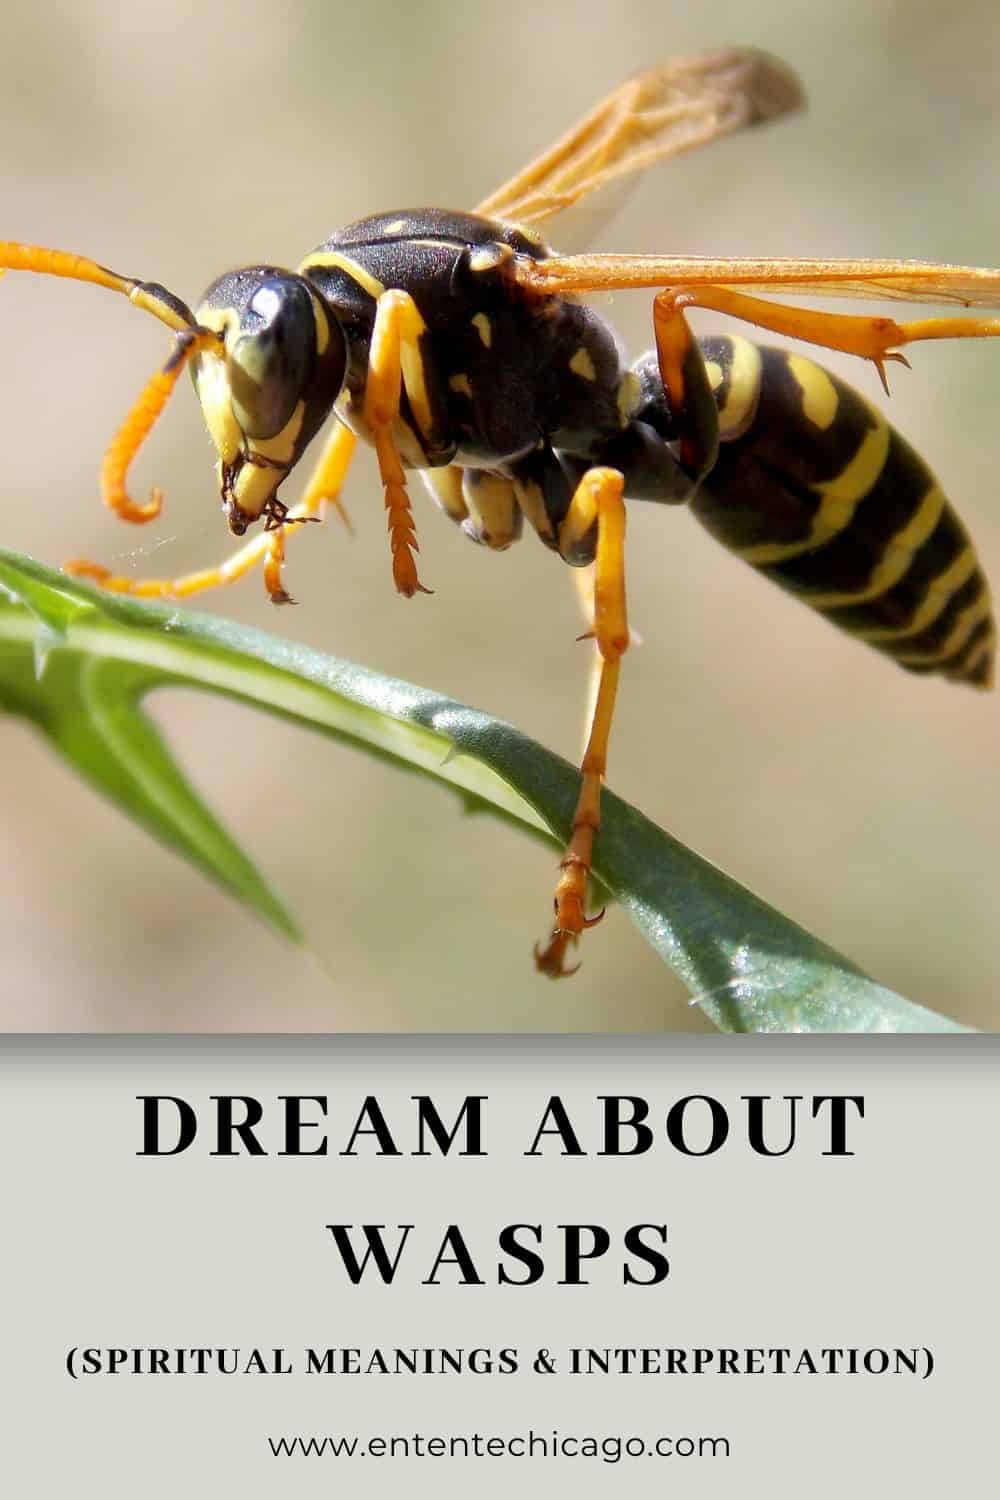 12 Meanings of Dreaming about Wasps